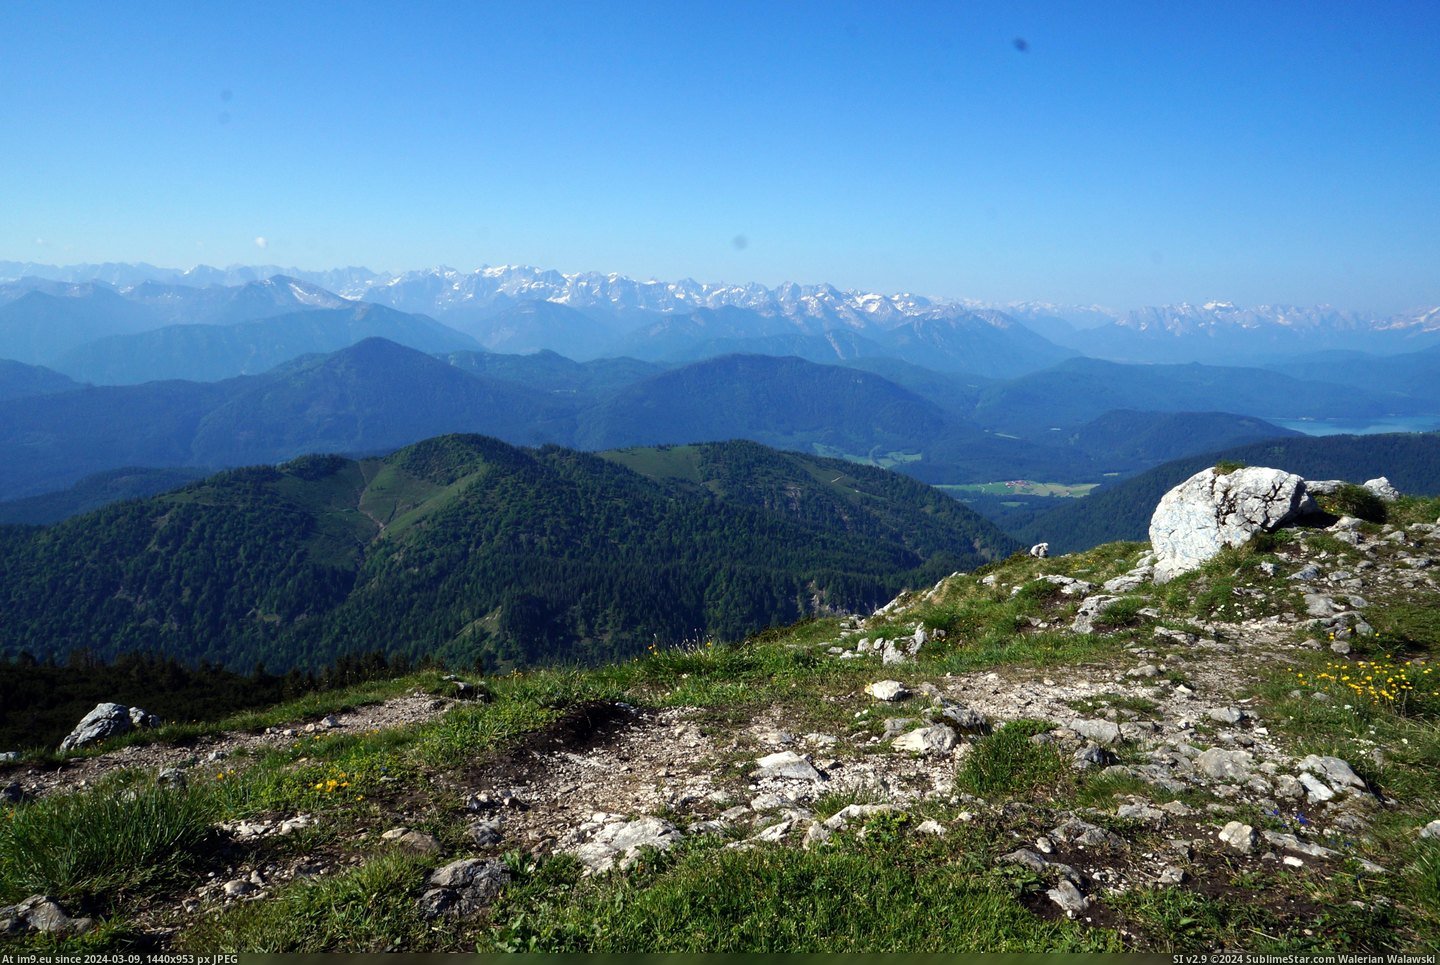 #Ongoing #Miles #4912x3264 #Summit #Bavaria [Earthporn] 20 Miles from the currently ongoing G-7 Summit in Bavaria (4912x3264) Pic. (Bild von album My r/EARTHPORN favs))